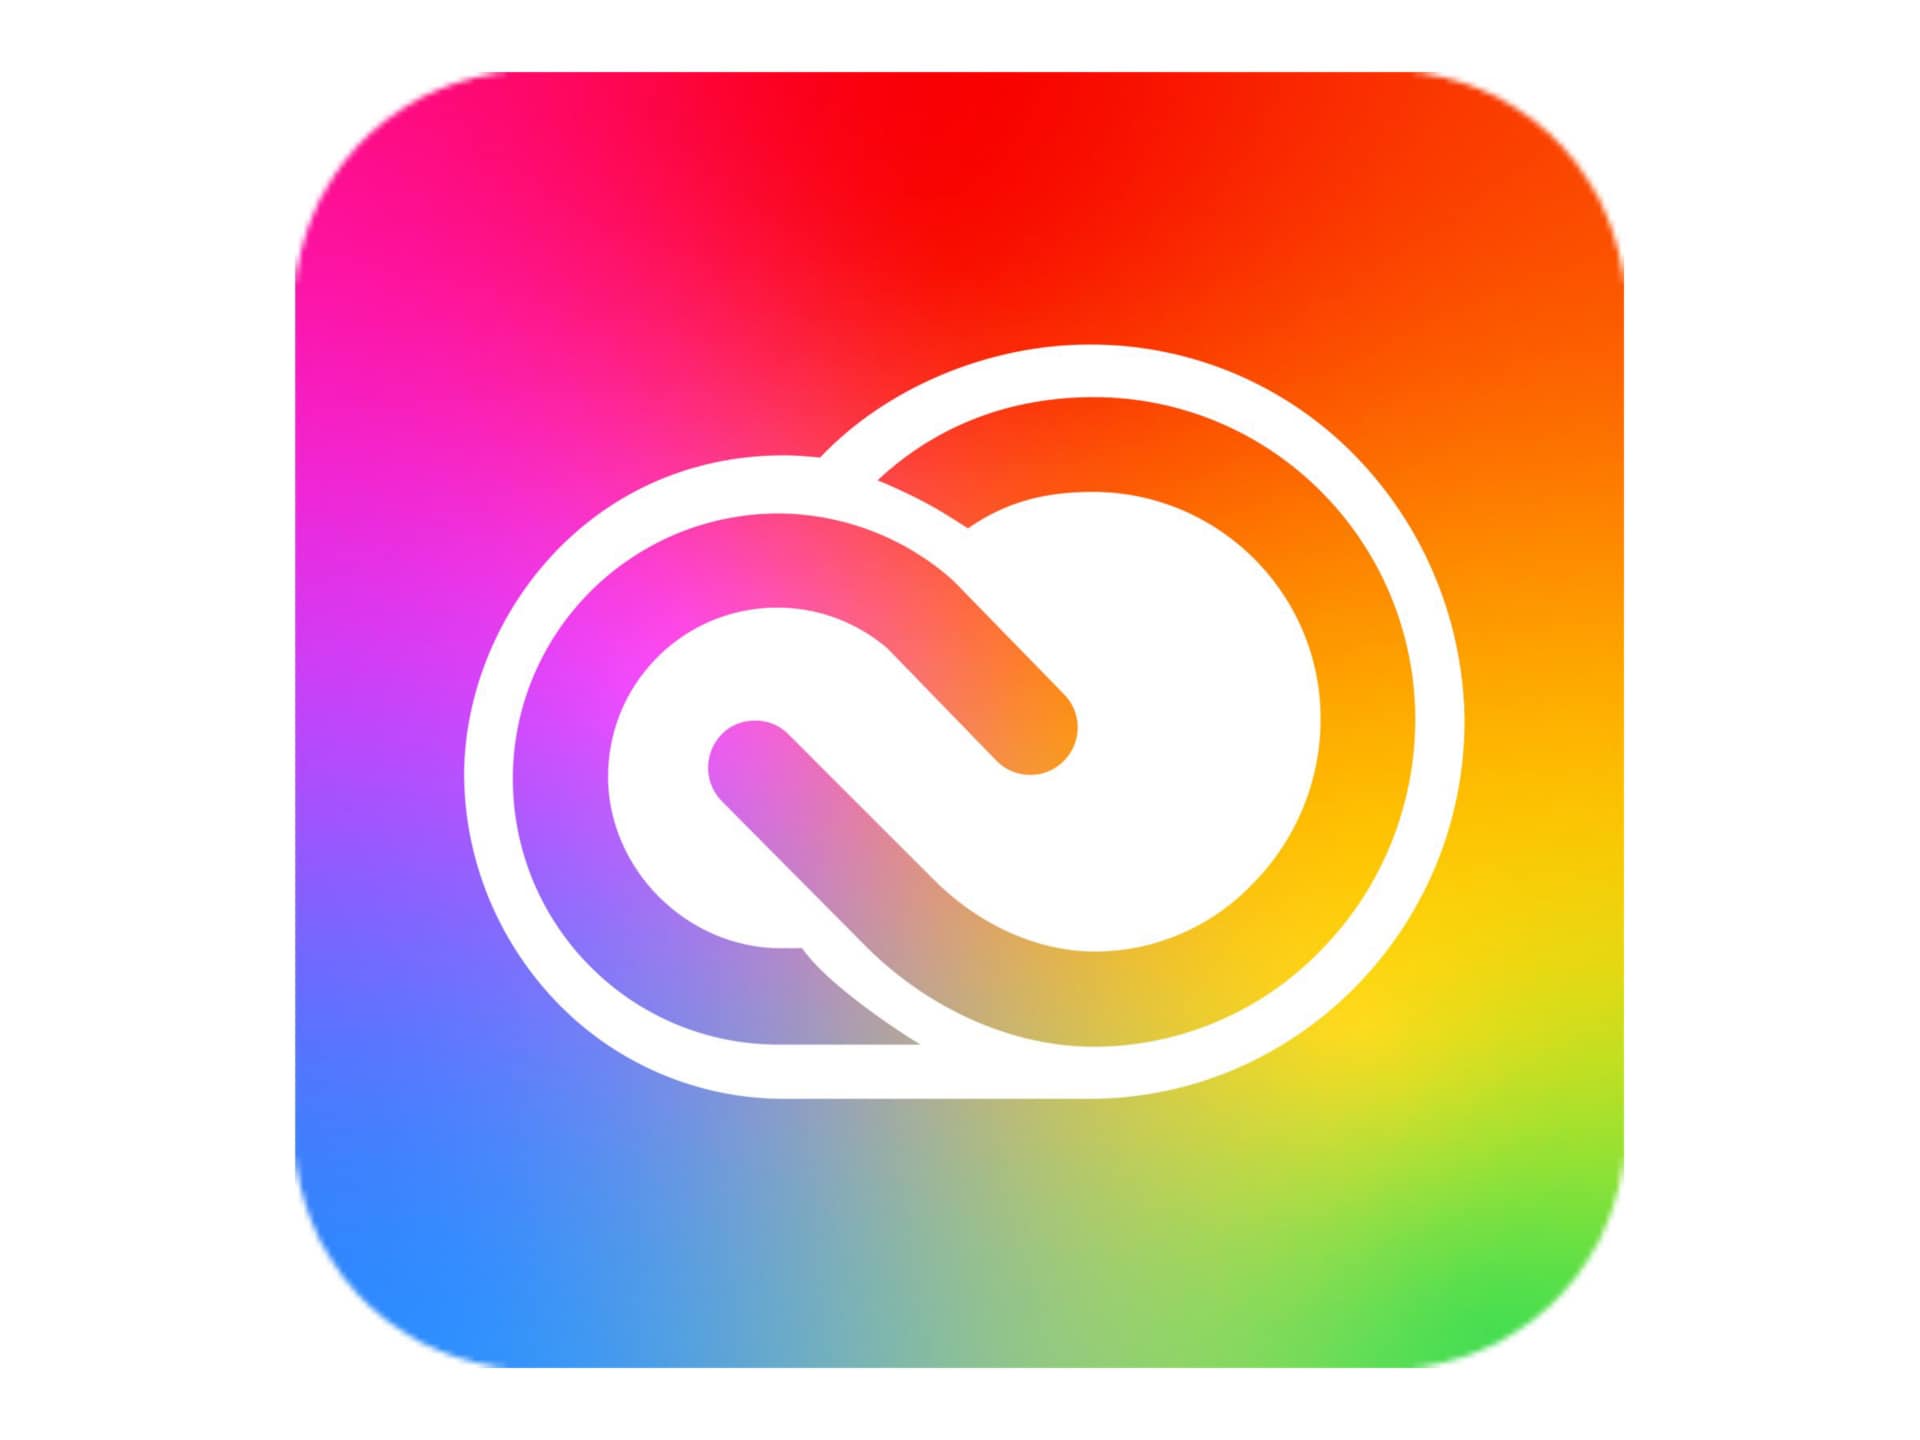 Adobe Creative Cloud for teams - Subscription New (3 months) - 10 assets, 1